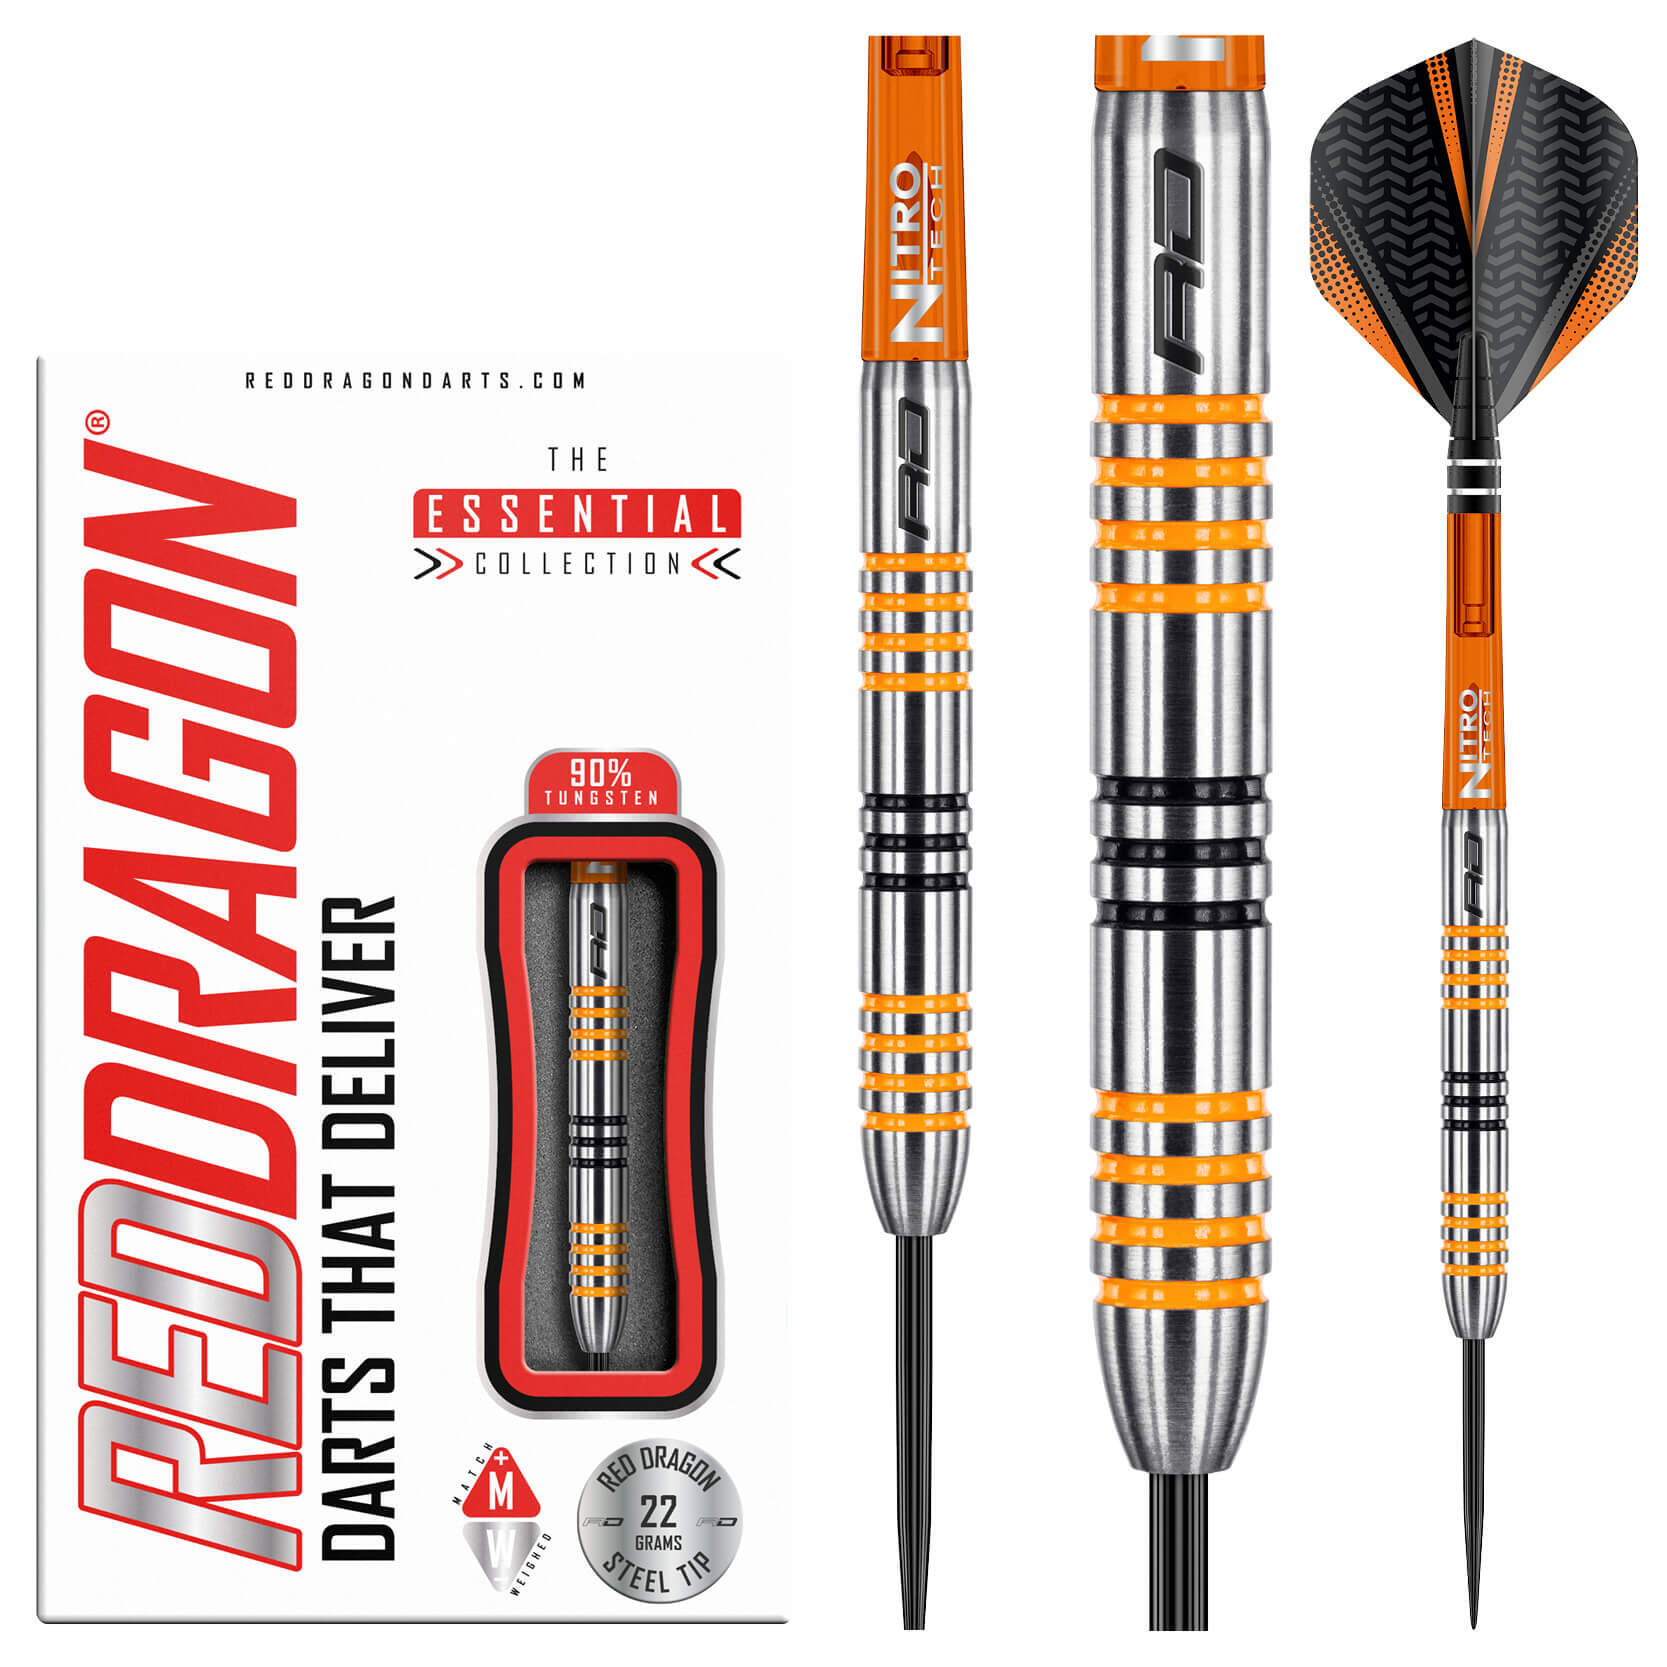 RED DRAGON DARTS Amberjack 3: 22g Tungsten Darts Set with Flights and Stems